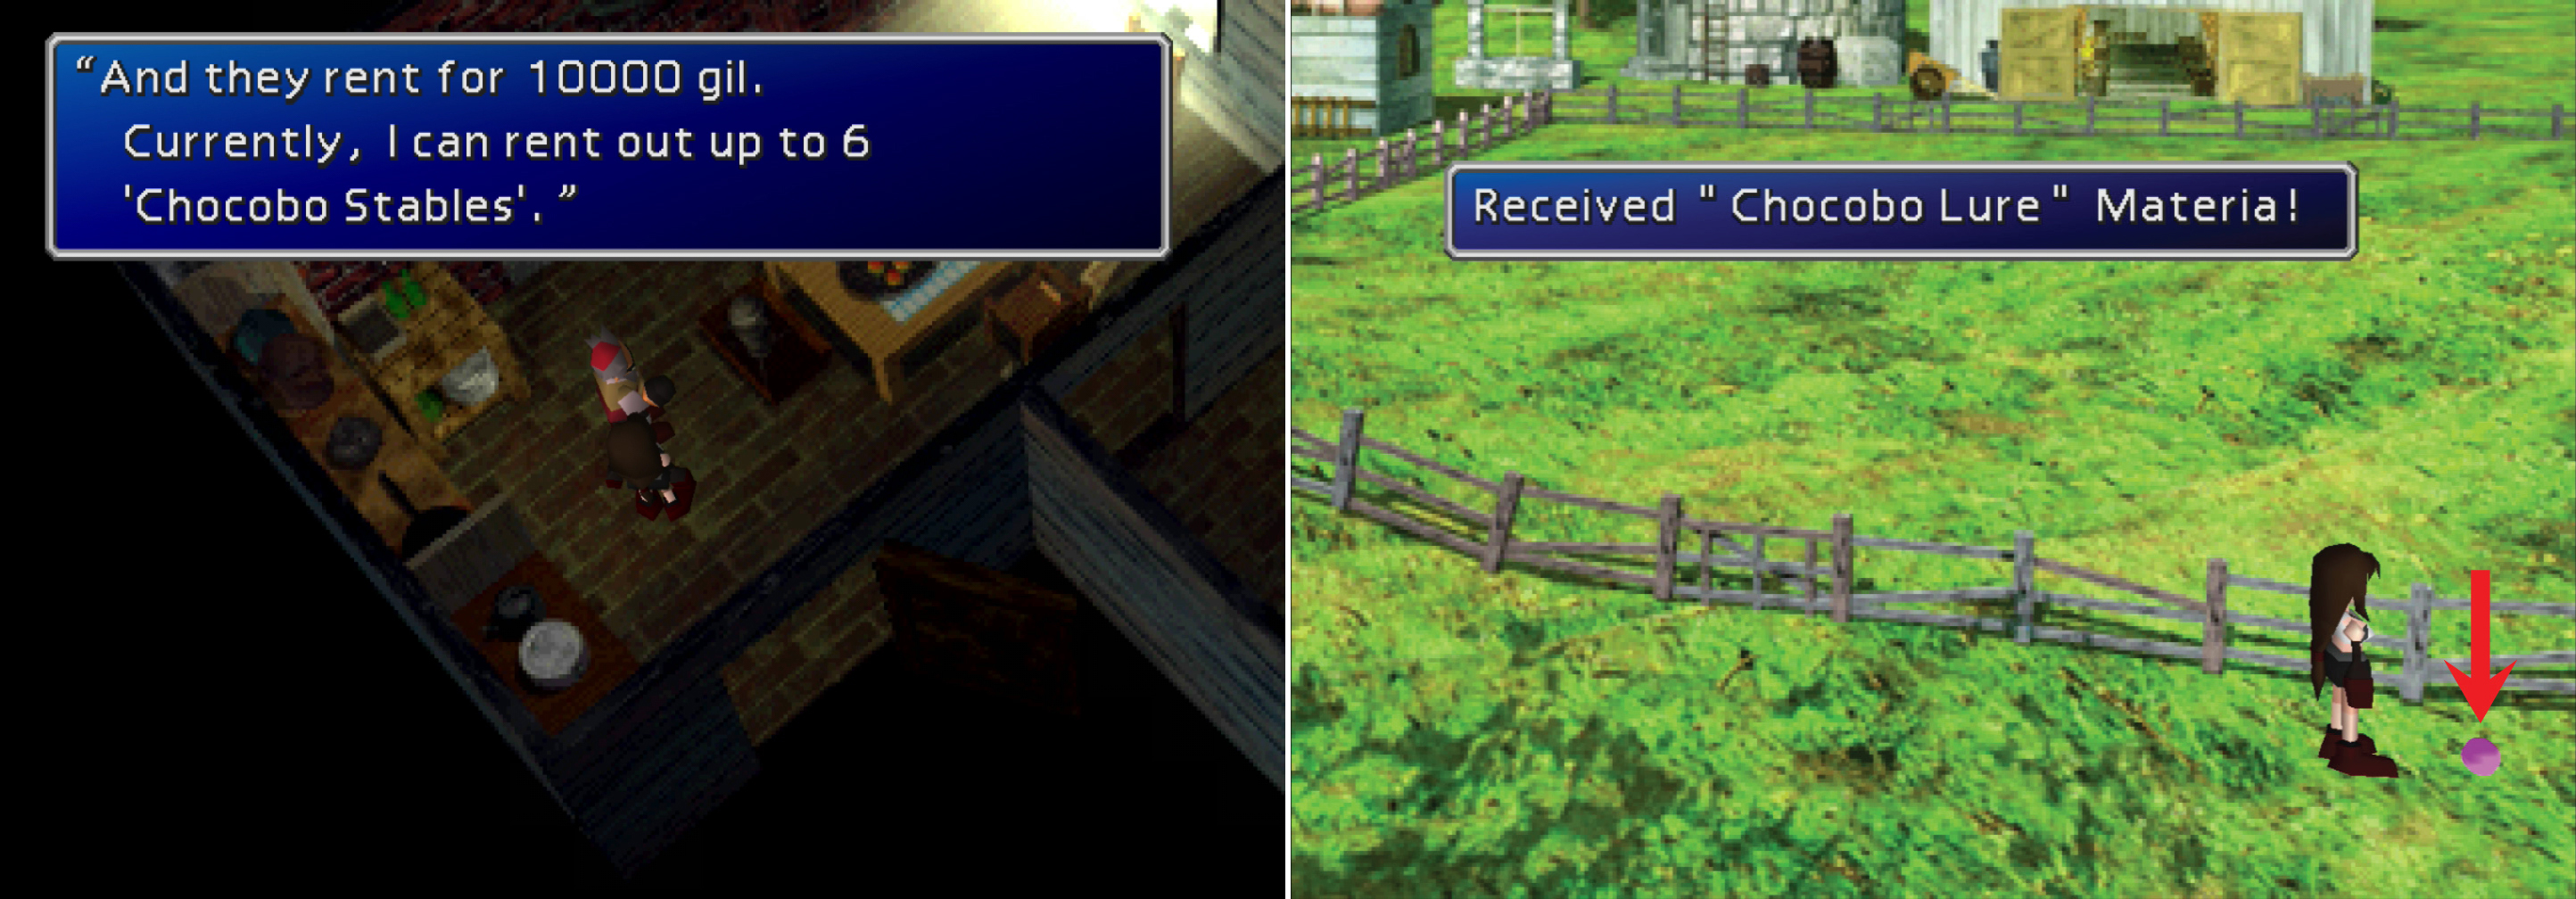 Theres no better time to rent Chocobo stables now that the world is ending… because reasons! They dont come cheap, however… (left). You can also obtain another piece of Chocobo Lure Materia (right).